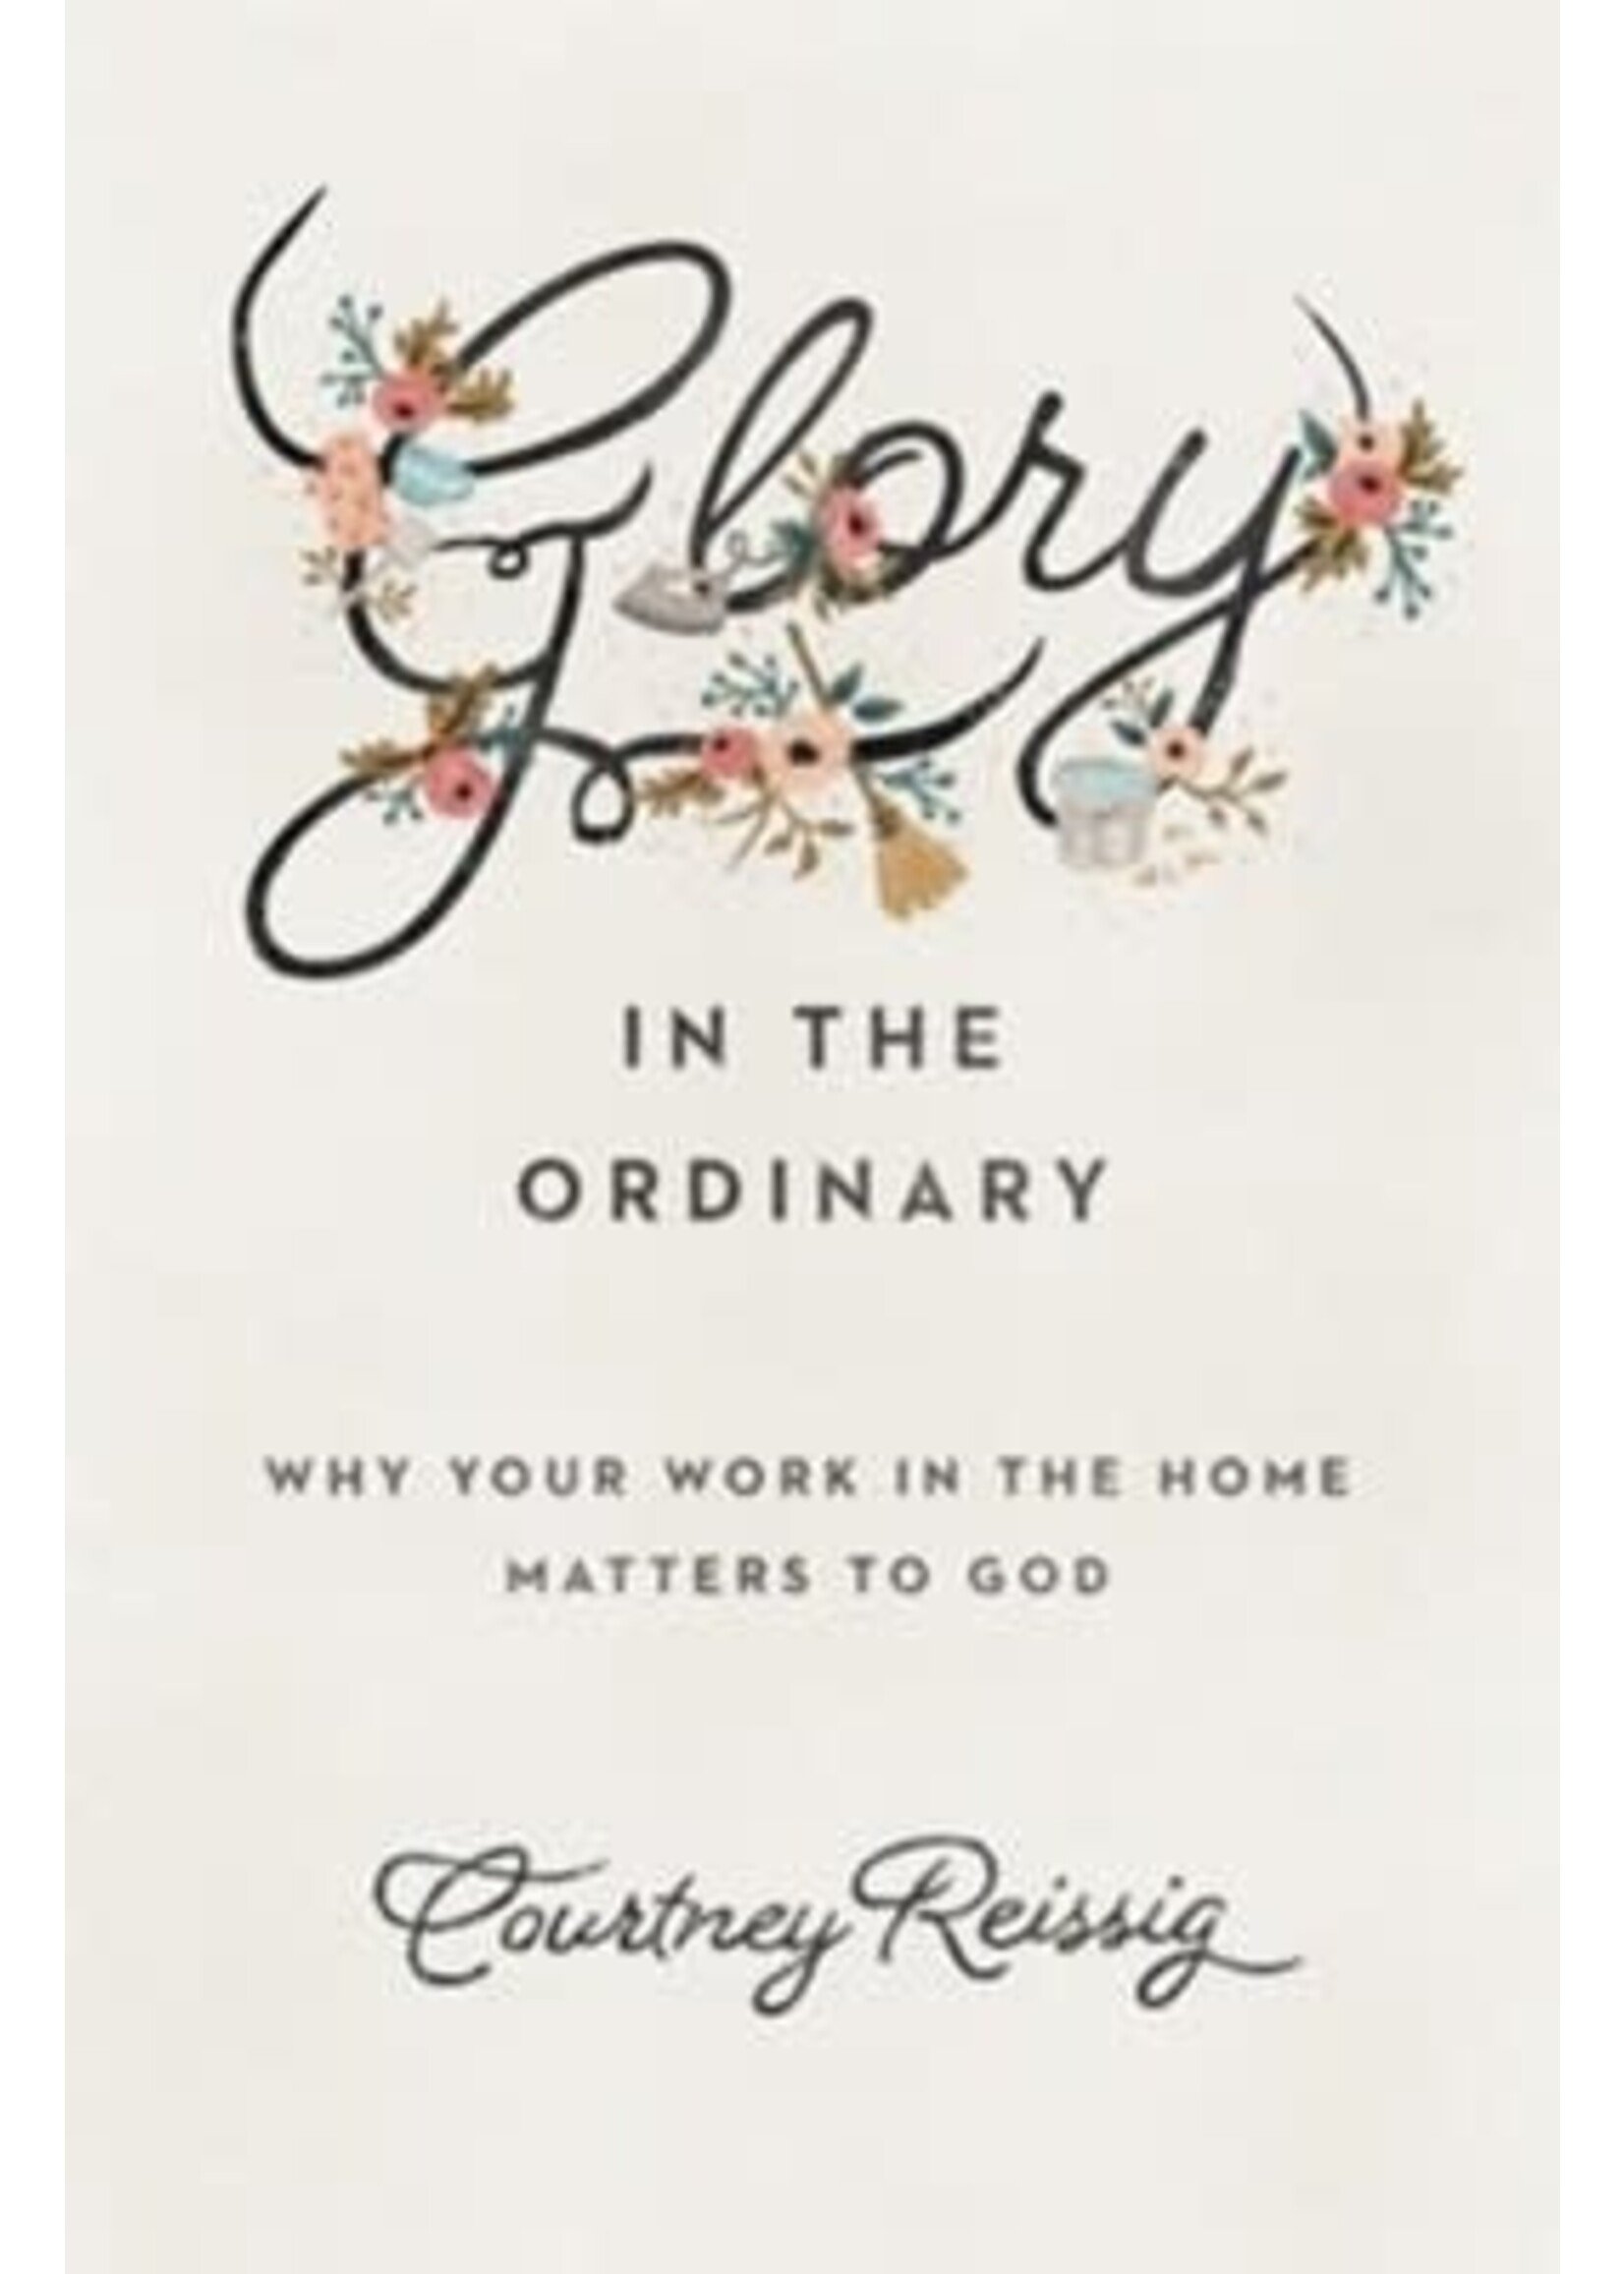 Glory in the Ordinary: Why Your Work in the Home Matters to God [Courtney Reissig]